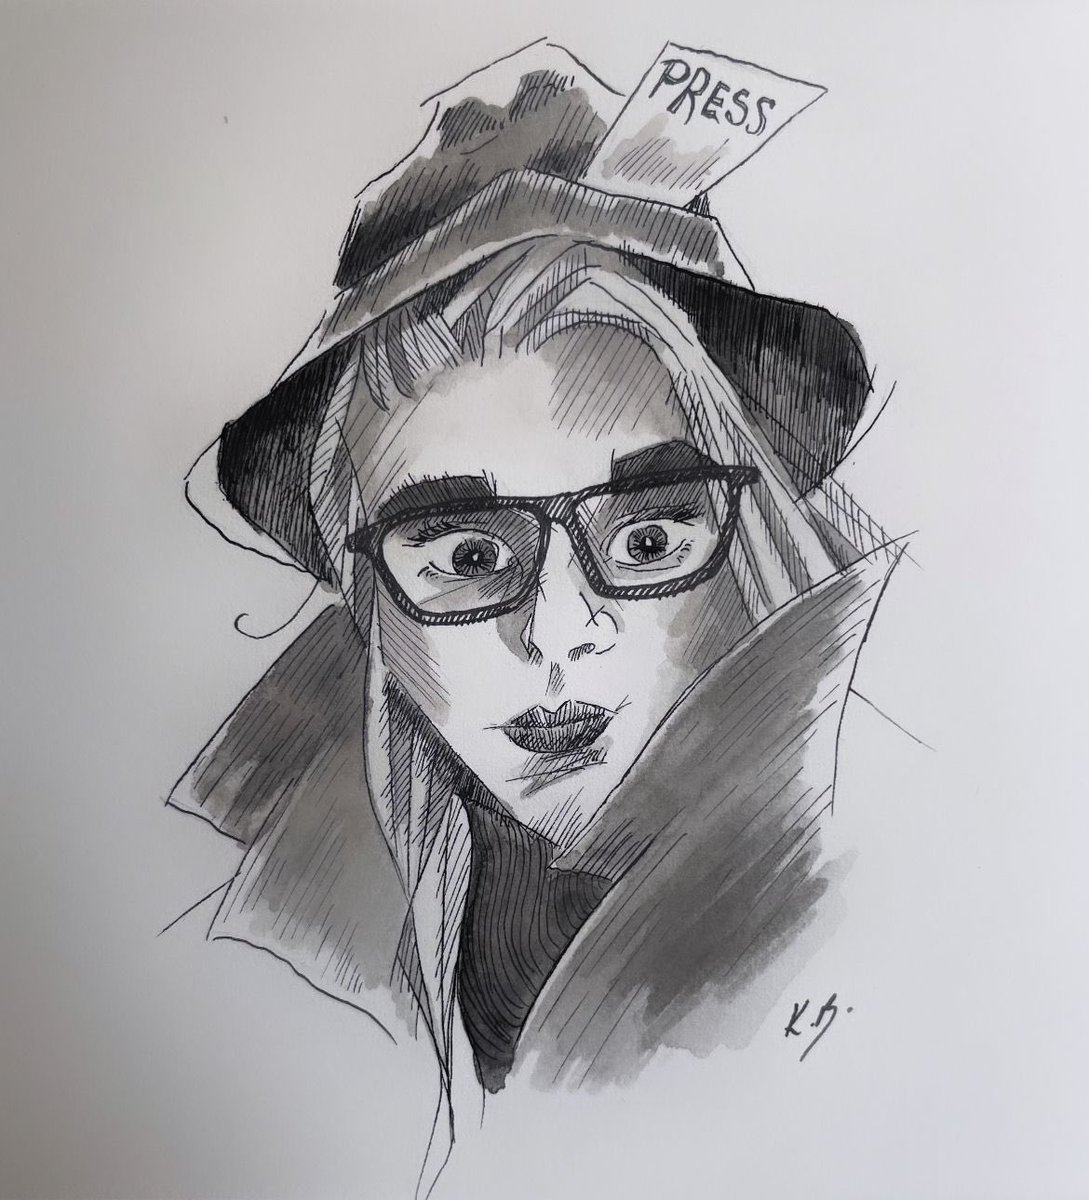 My sister @KarlaBrading a fantastically talented illustrator, drew me in ink! ❤️🗞️